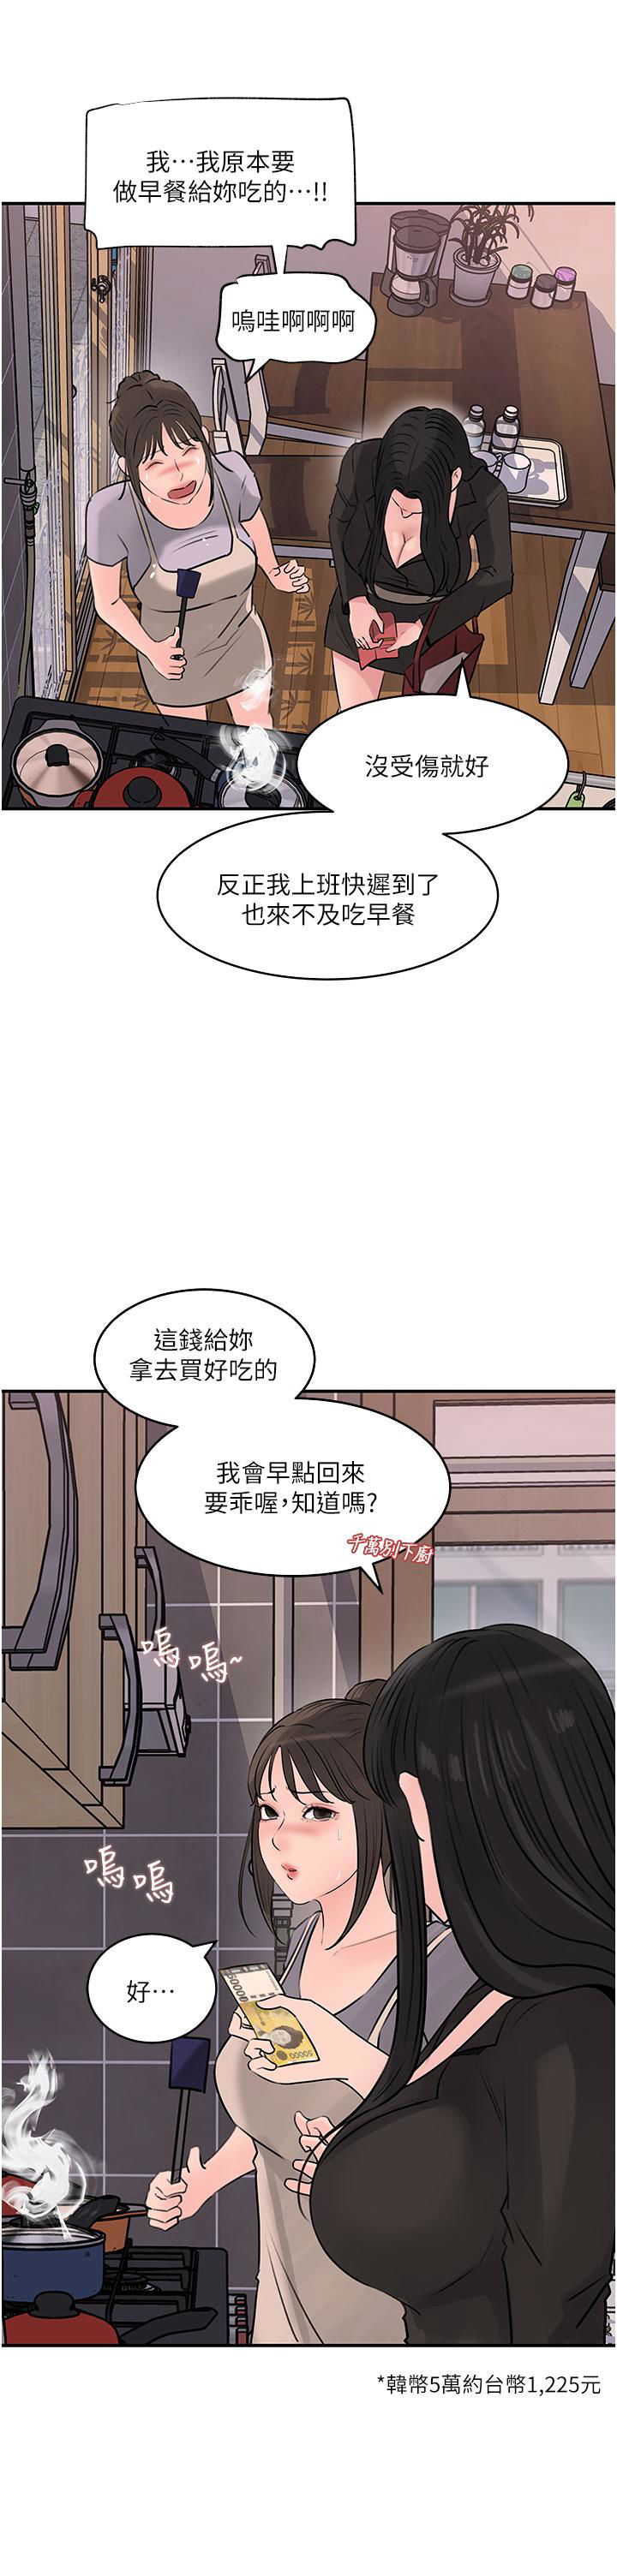 in-my-sister-in-law-raw-chap-35-18